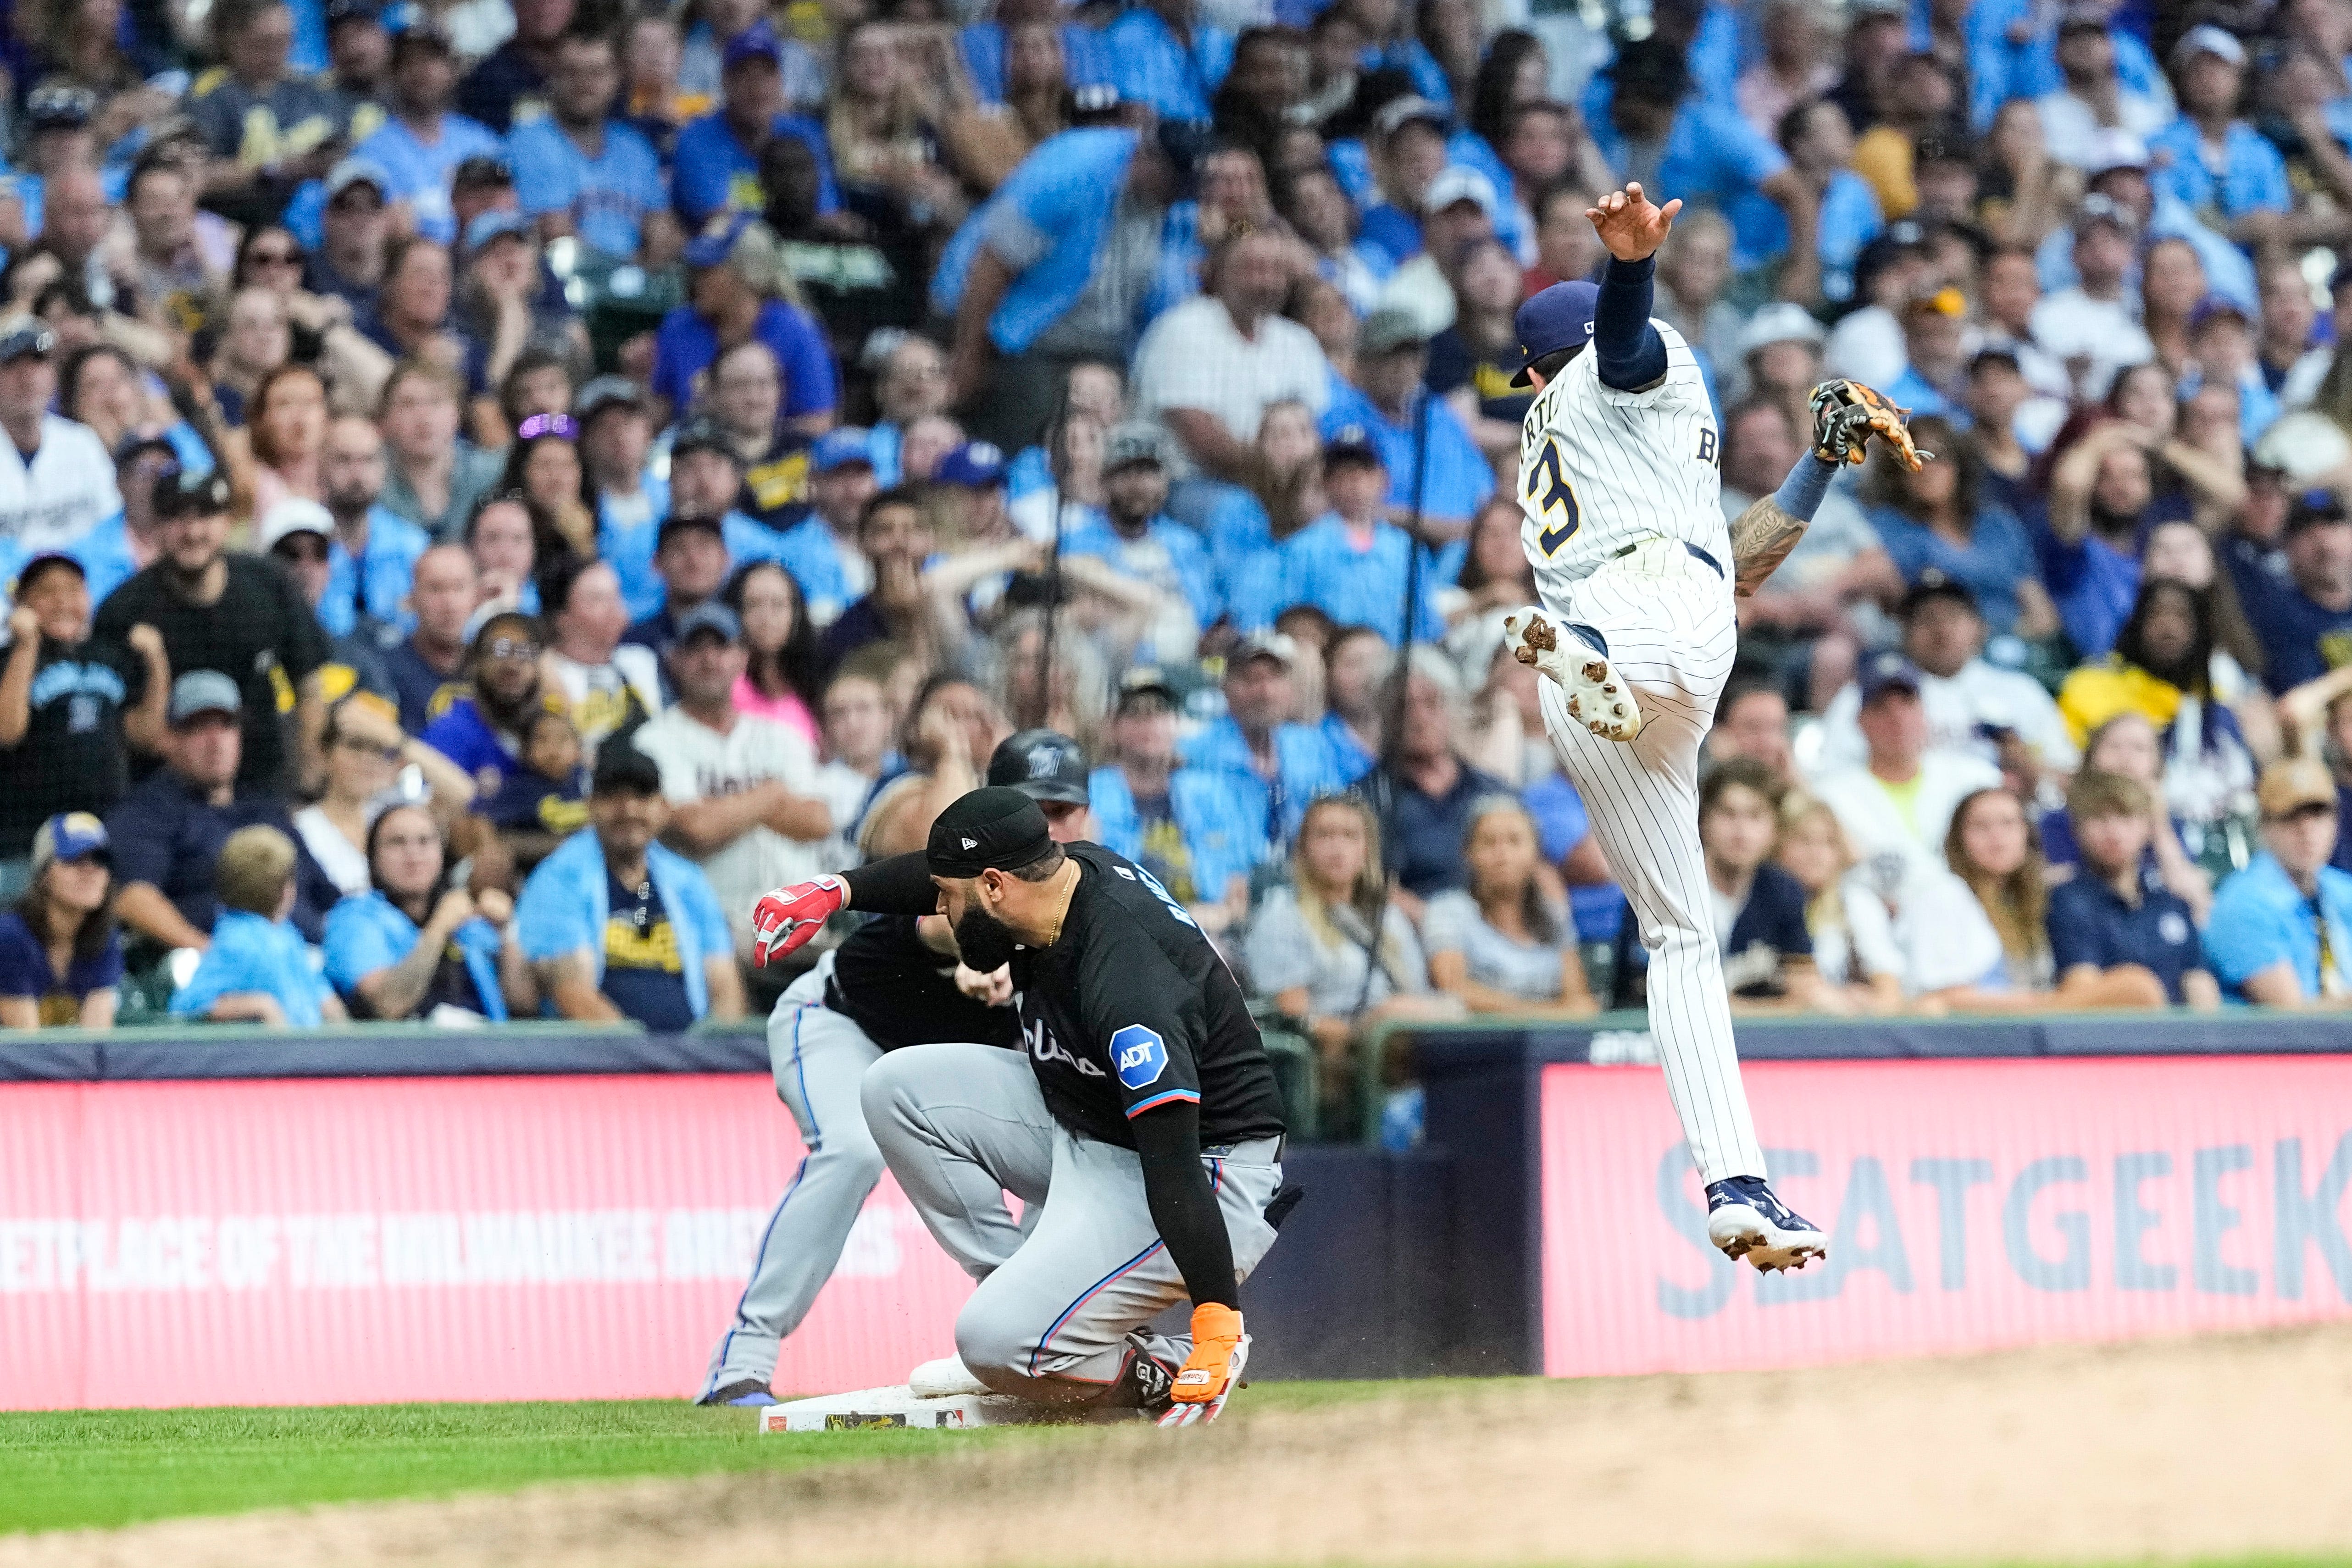 Marlins 7, Brewers 3: Another bad night against a bad team